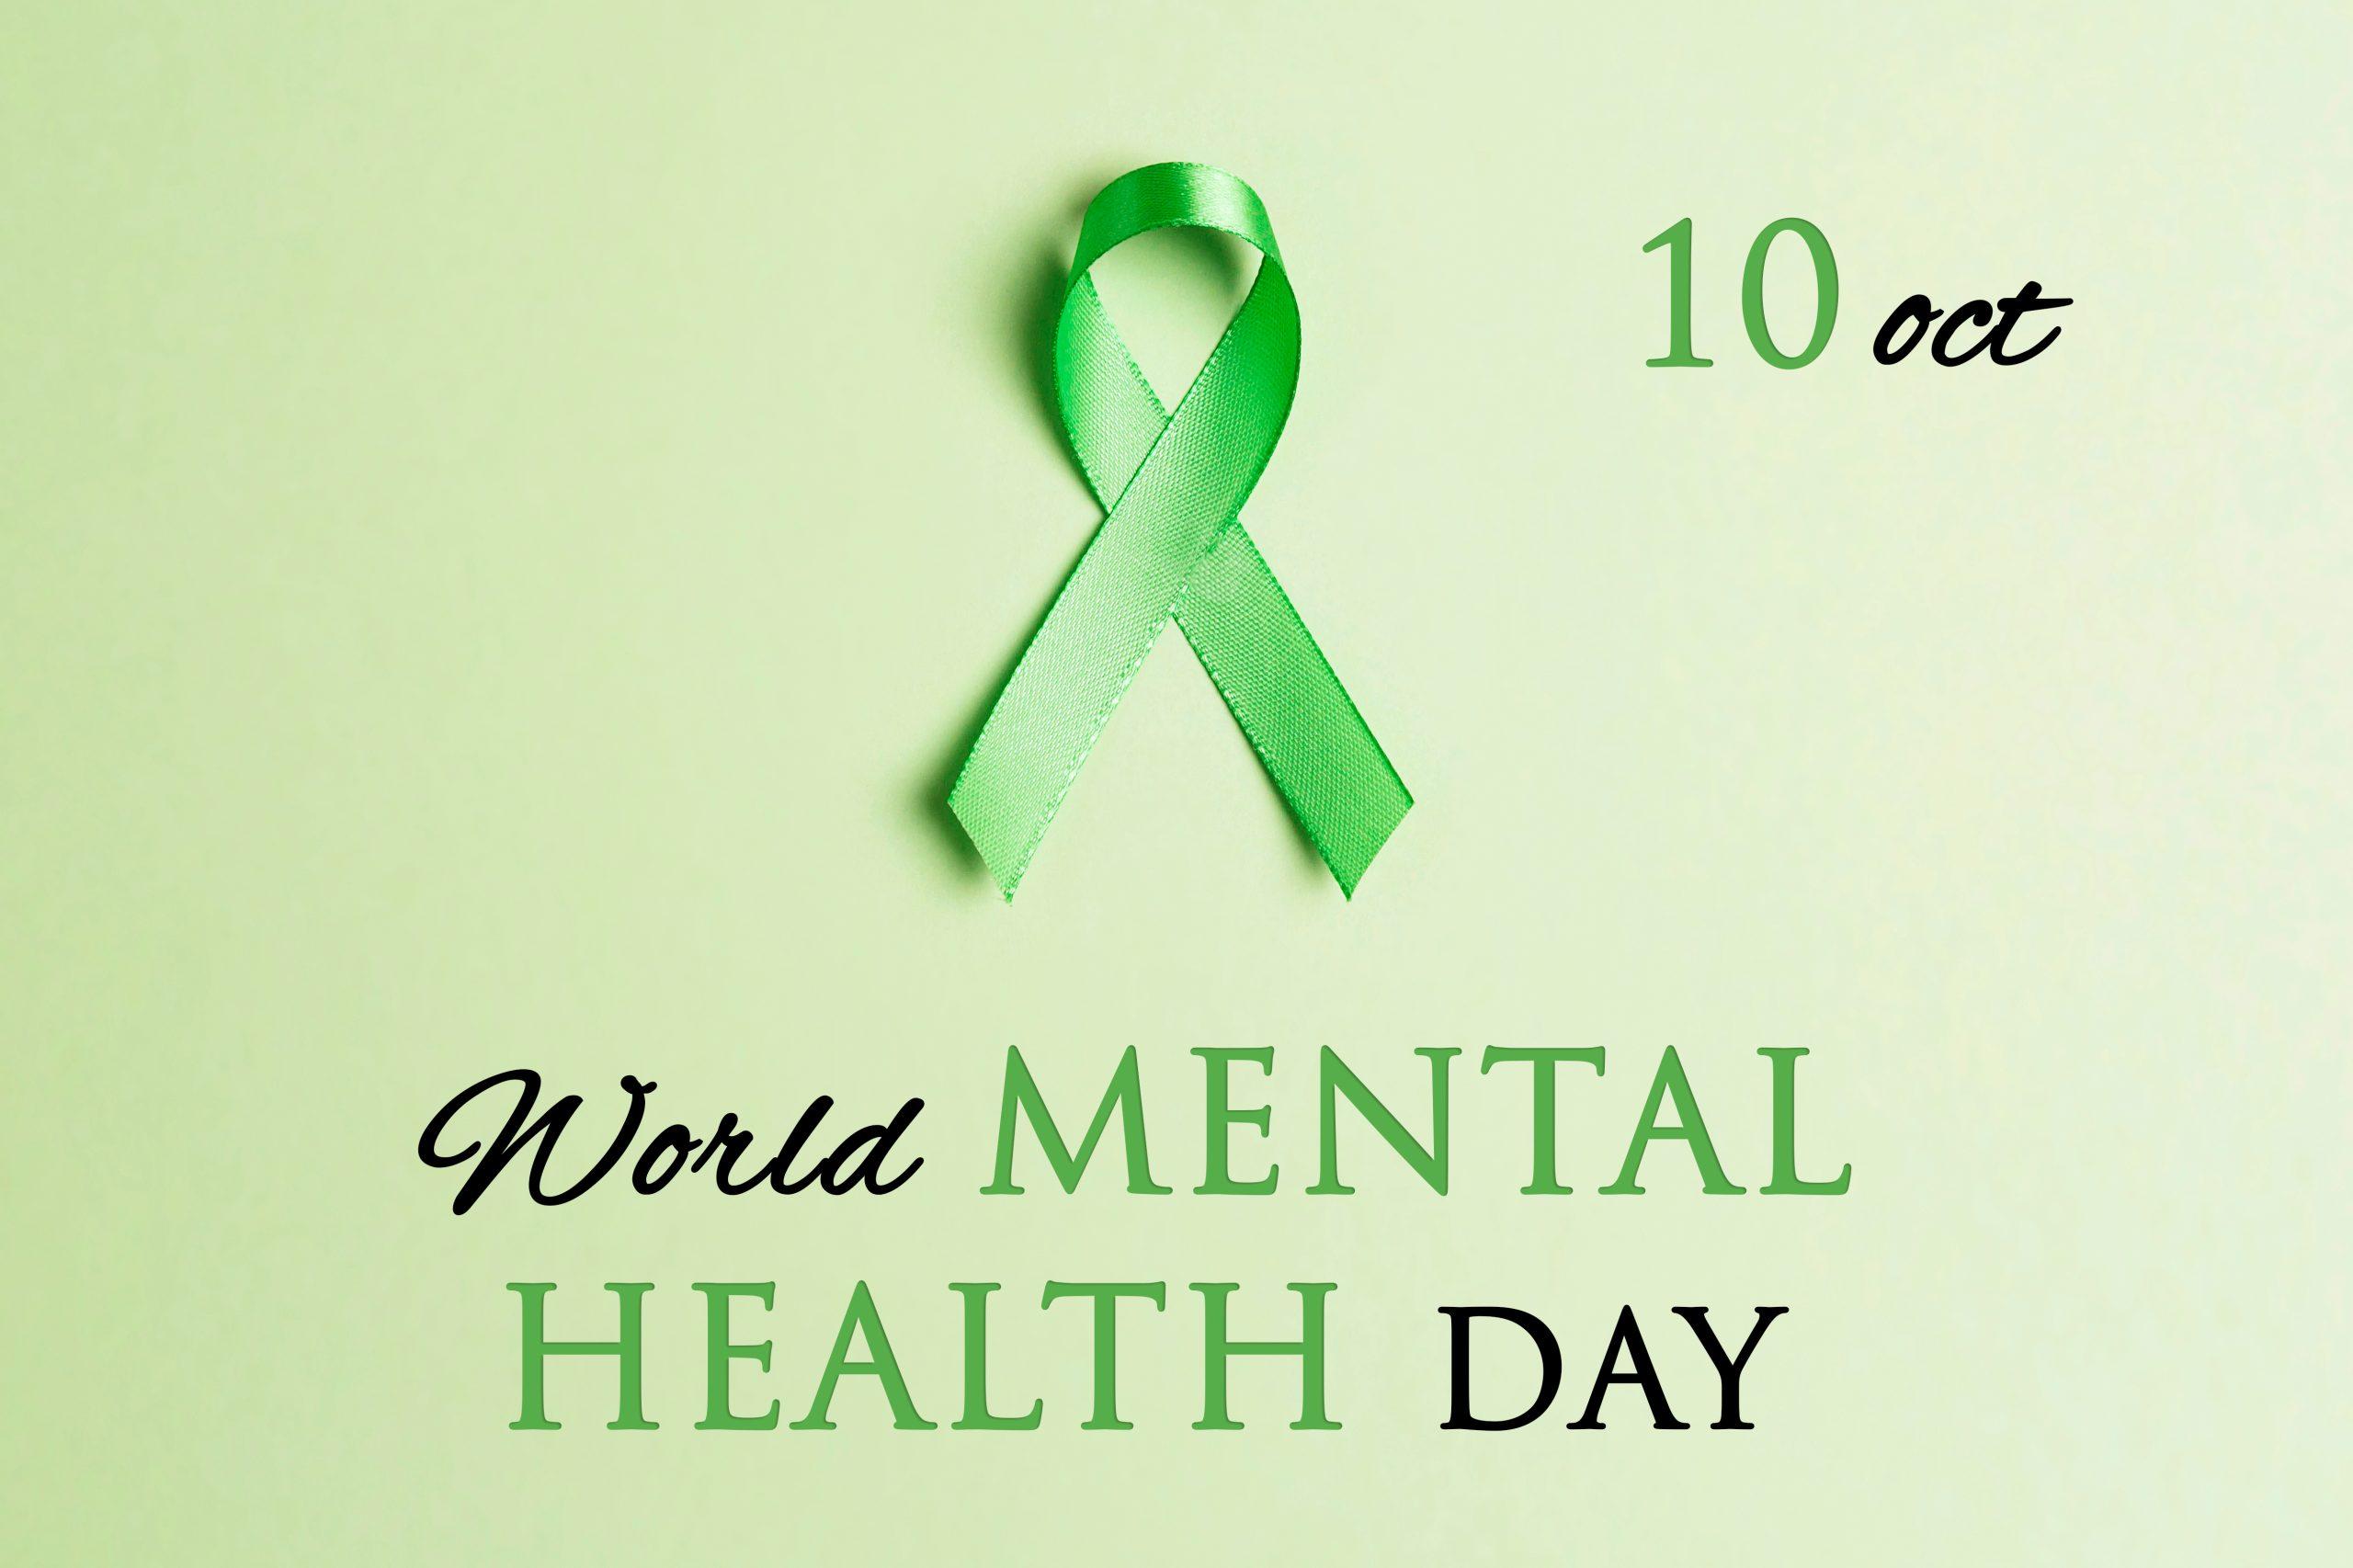 Connection can save lives, On the Power of Presence, Mental Health Awareness Day October 10th